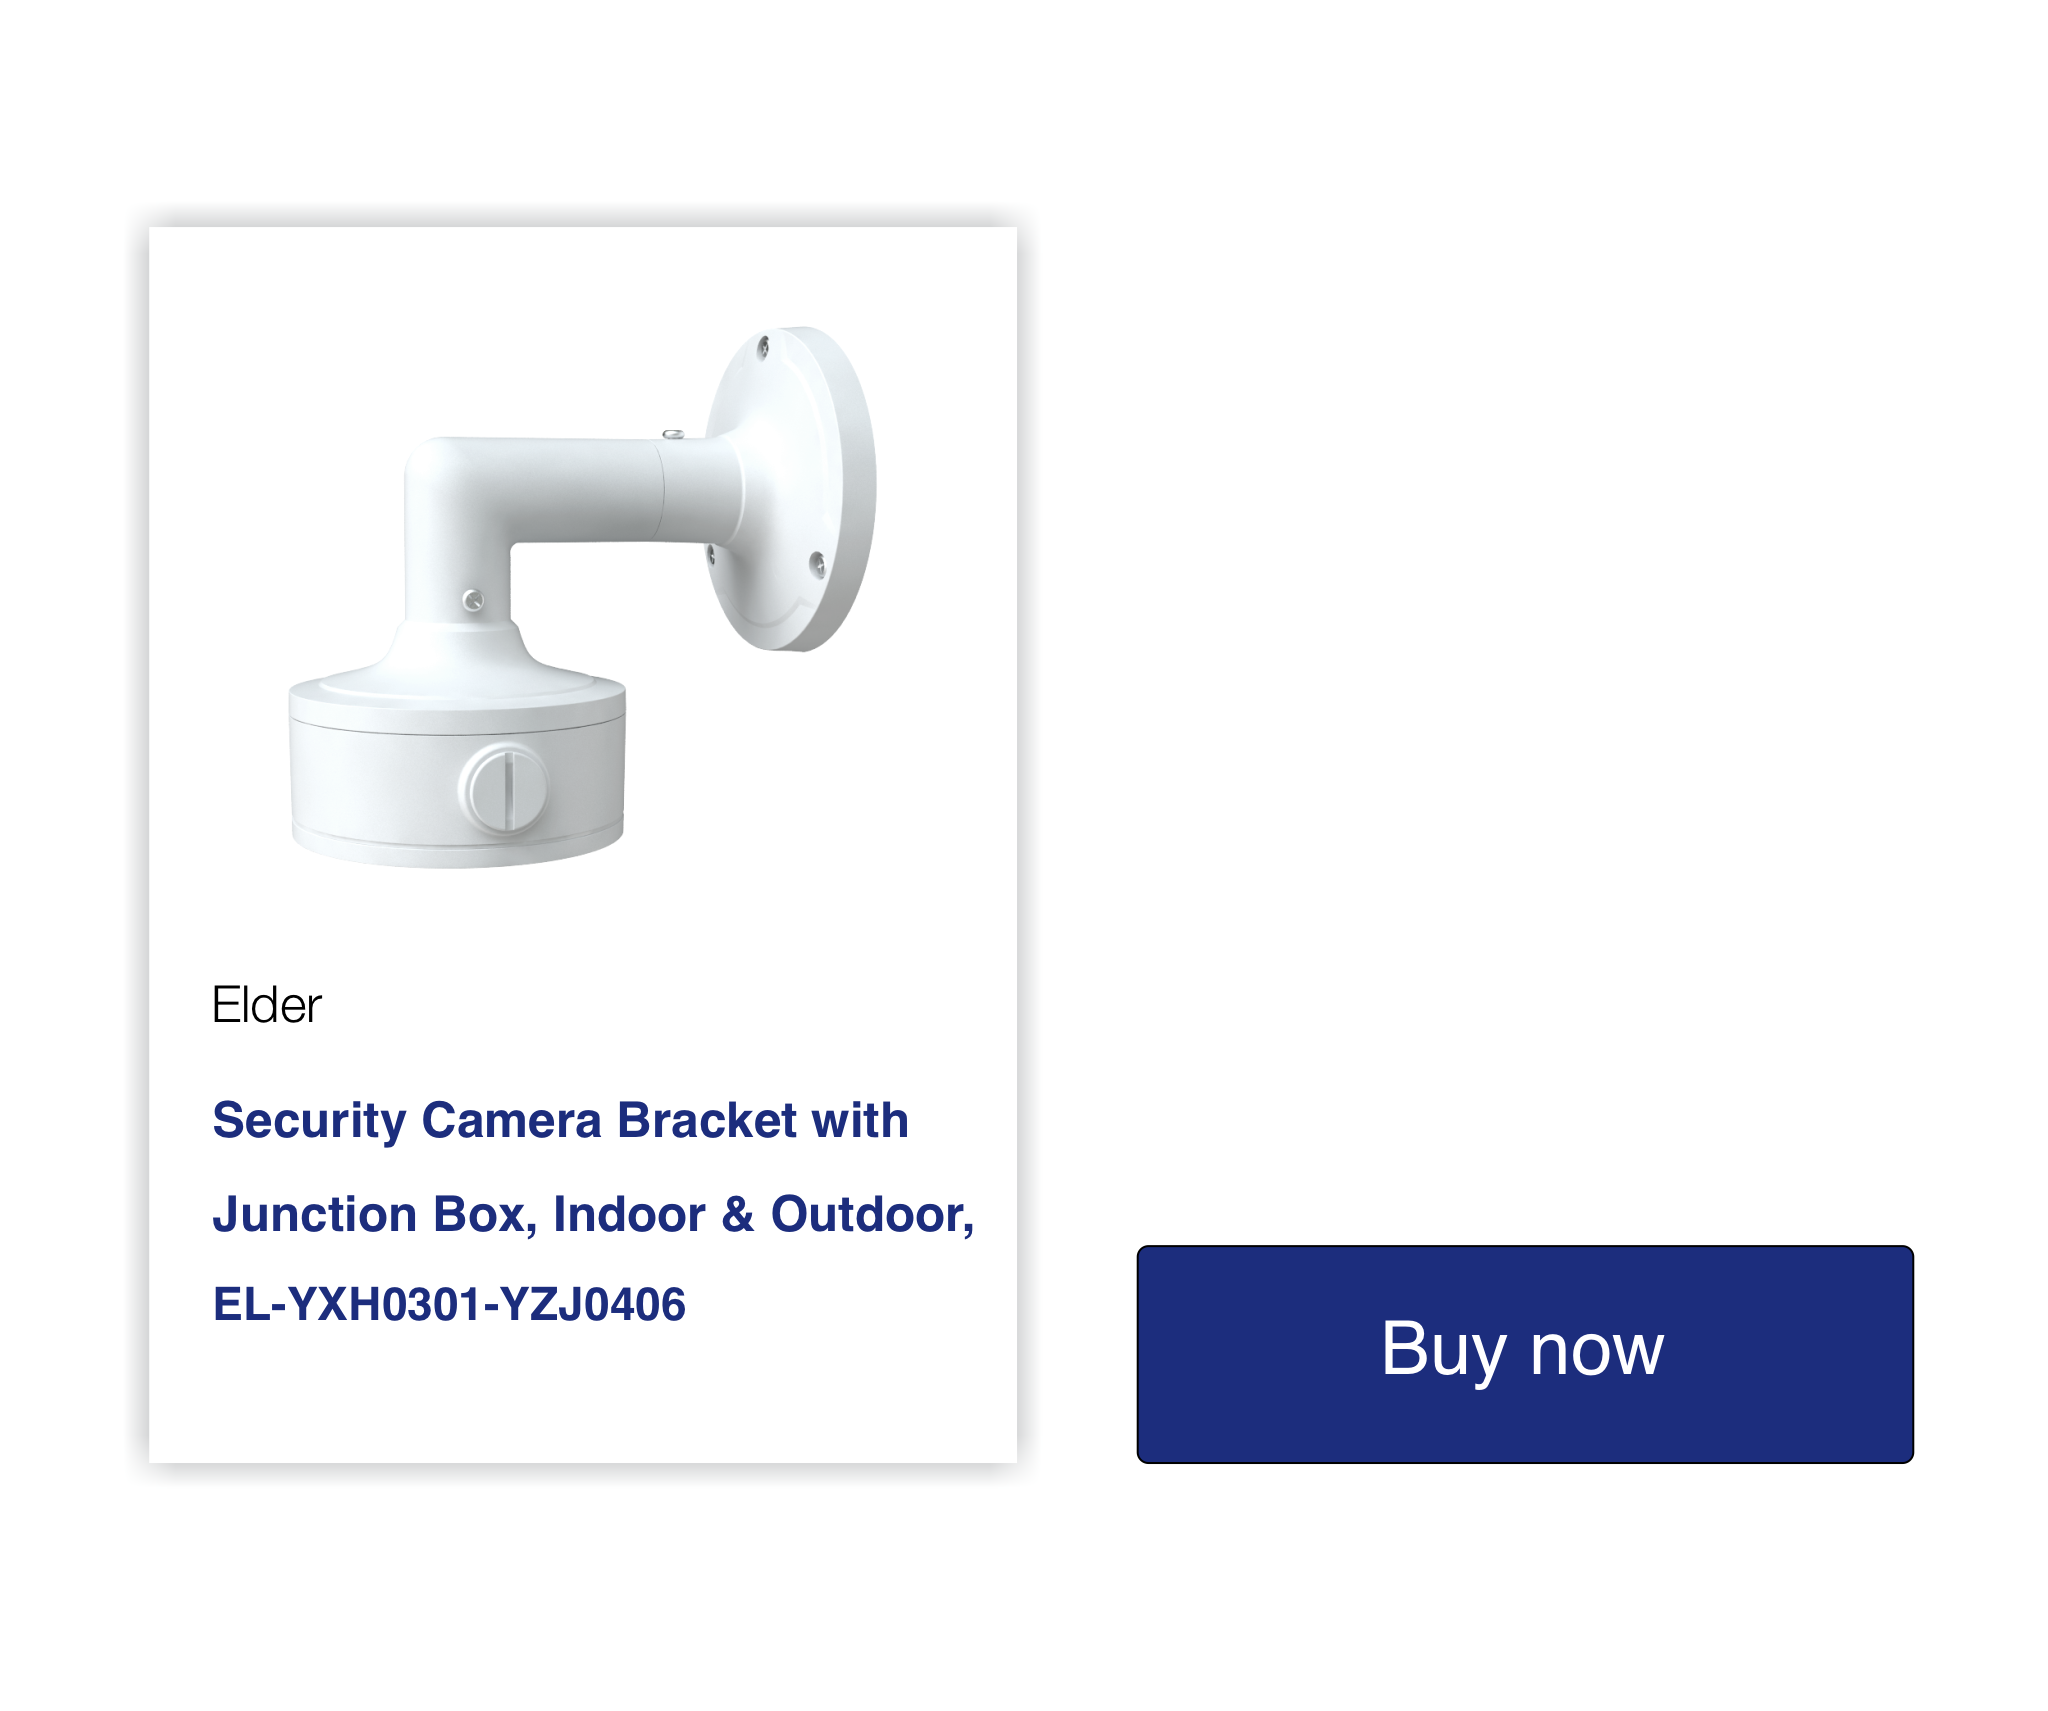 Elder 4K security camera systems from Ultimate-I series are frequently bought with junction boxes and brackets. Security camera junction boxes and brackets protect the camera connectors and cables from vandalism and deter the tamper. Junction boxes make the installation more elegant, clean, and professional.